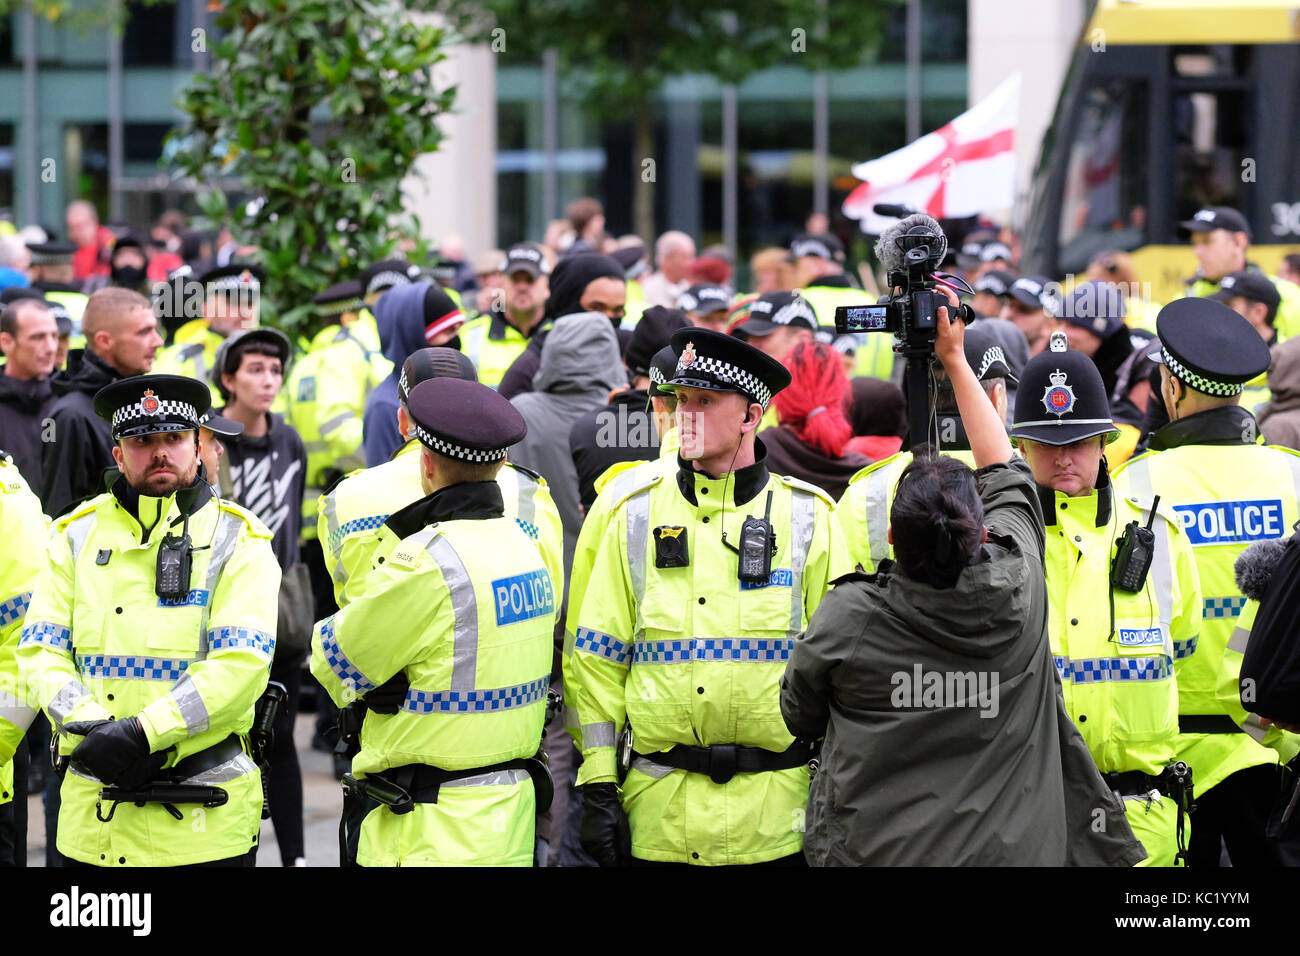 St Peters Square, Manchester, UK - Sunday 1st October 2017 - Police officers surround and kettle a small group of protesters outside the Conservative Party Conference. Photo Steven May / Alamy Live News Stock Photo